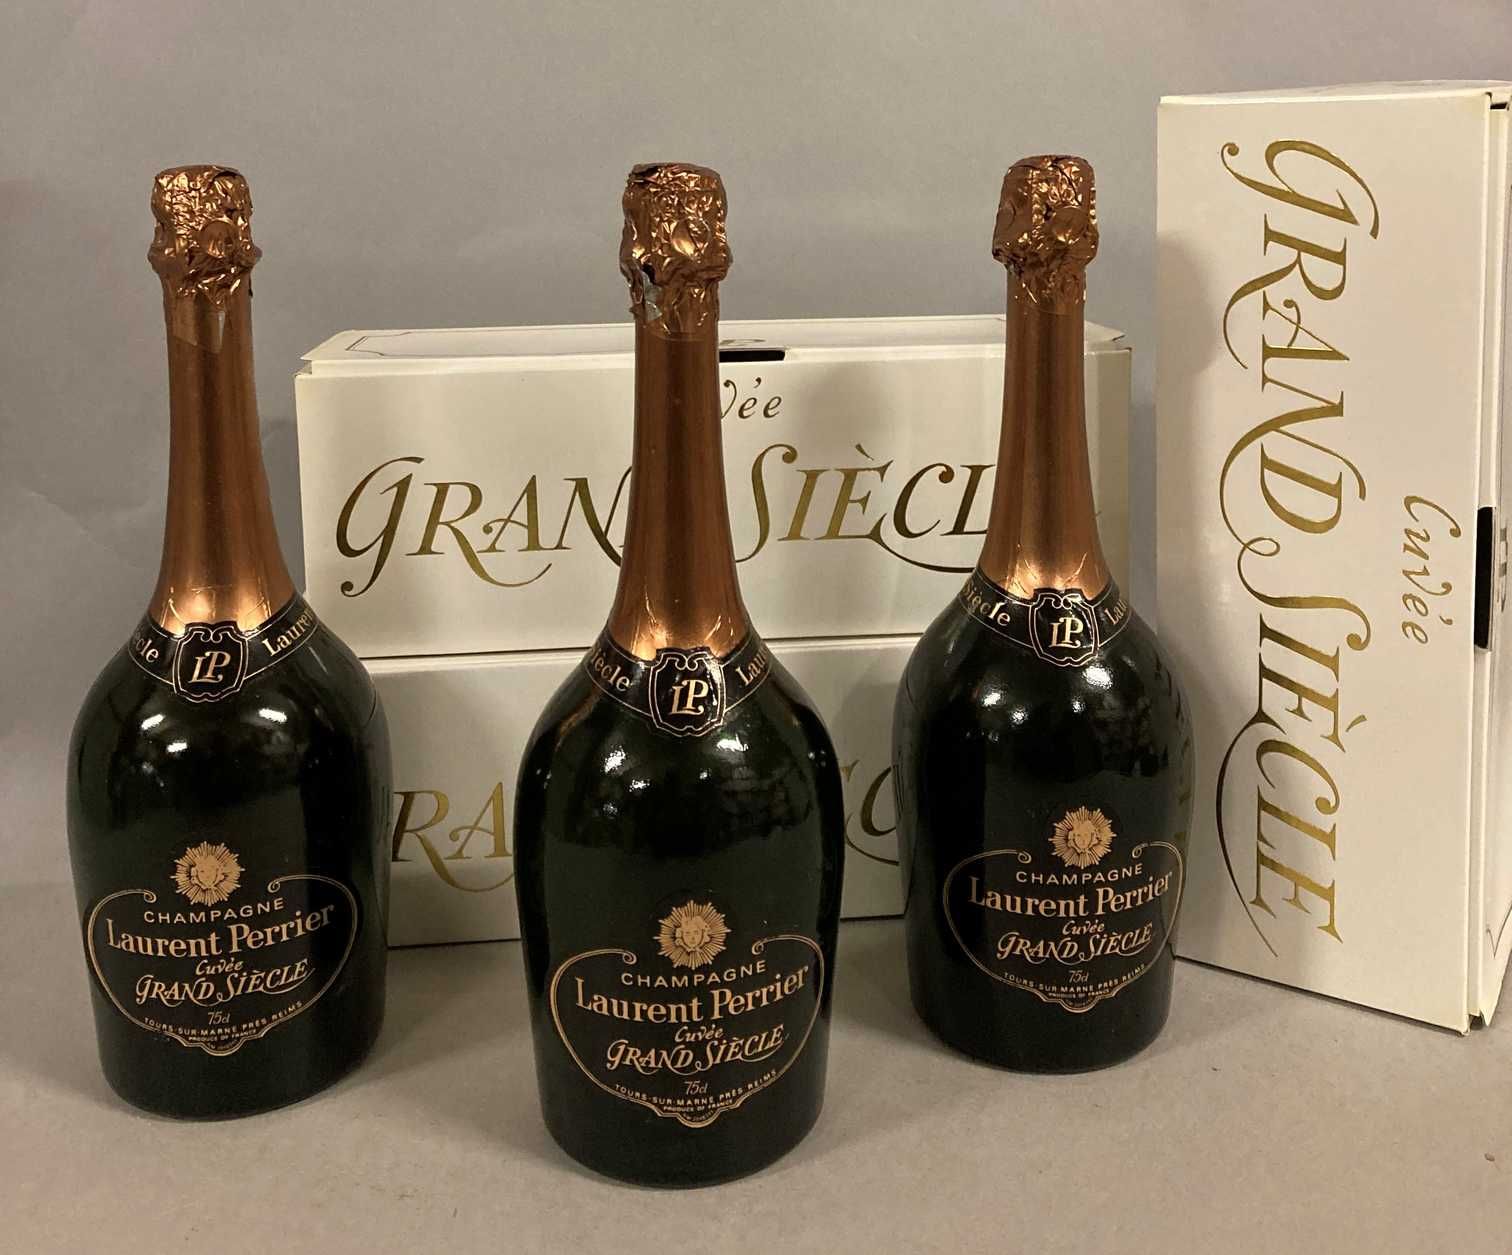 Null 3瓶CHAMPAGNE "Grand Siècle", Laurent-Perrier (1 LB, 2 MB) in a case